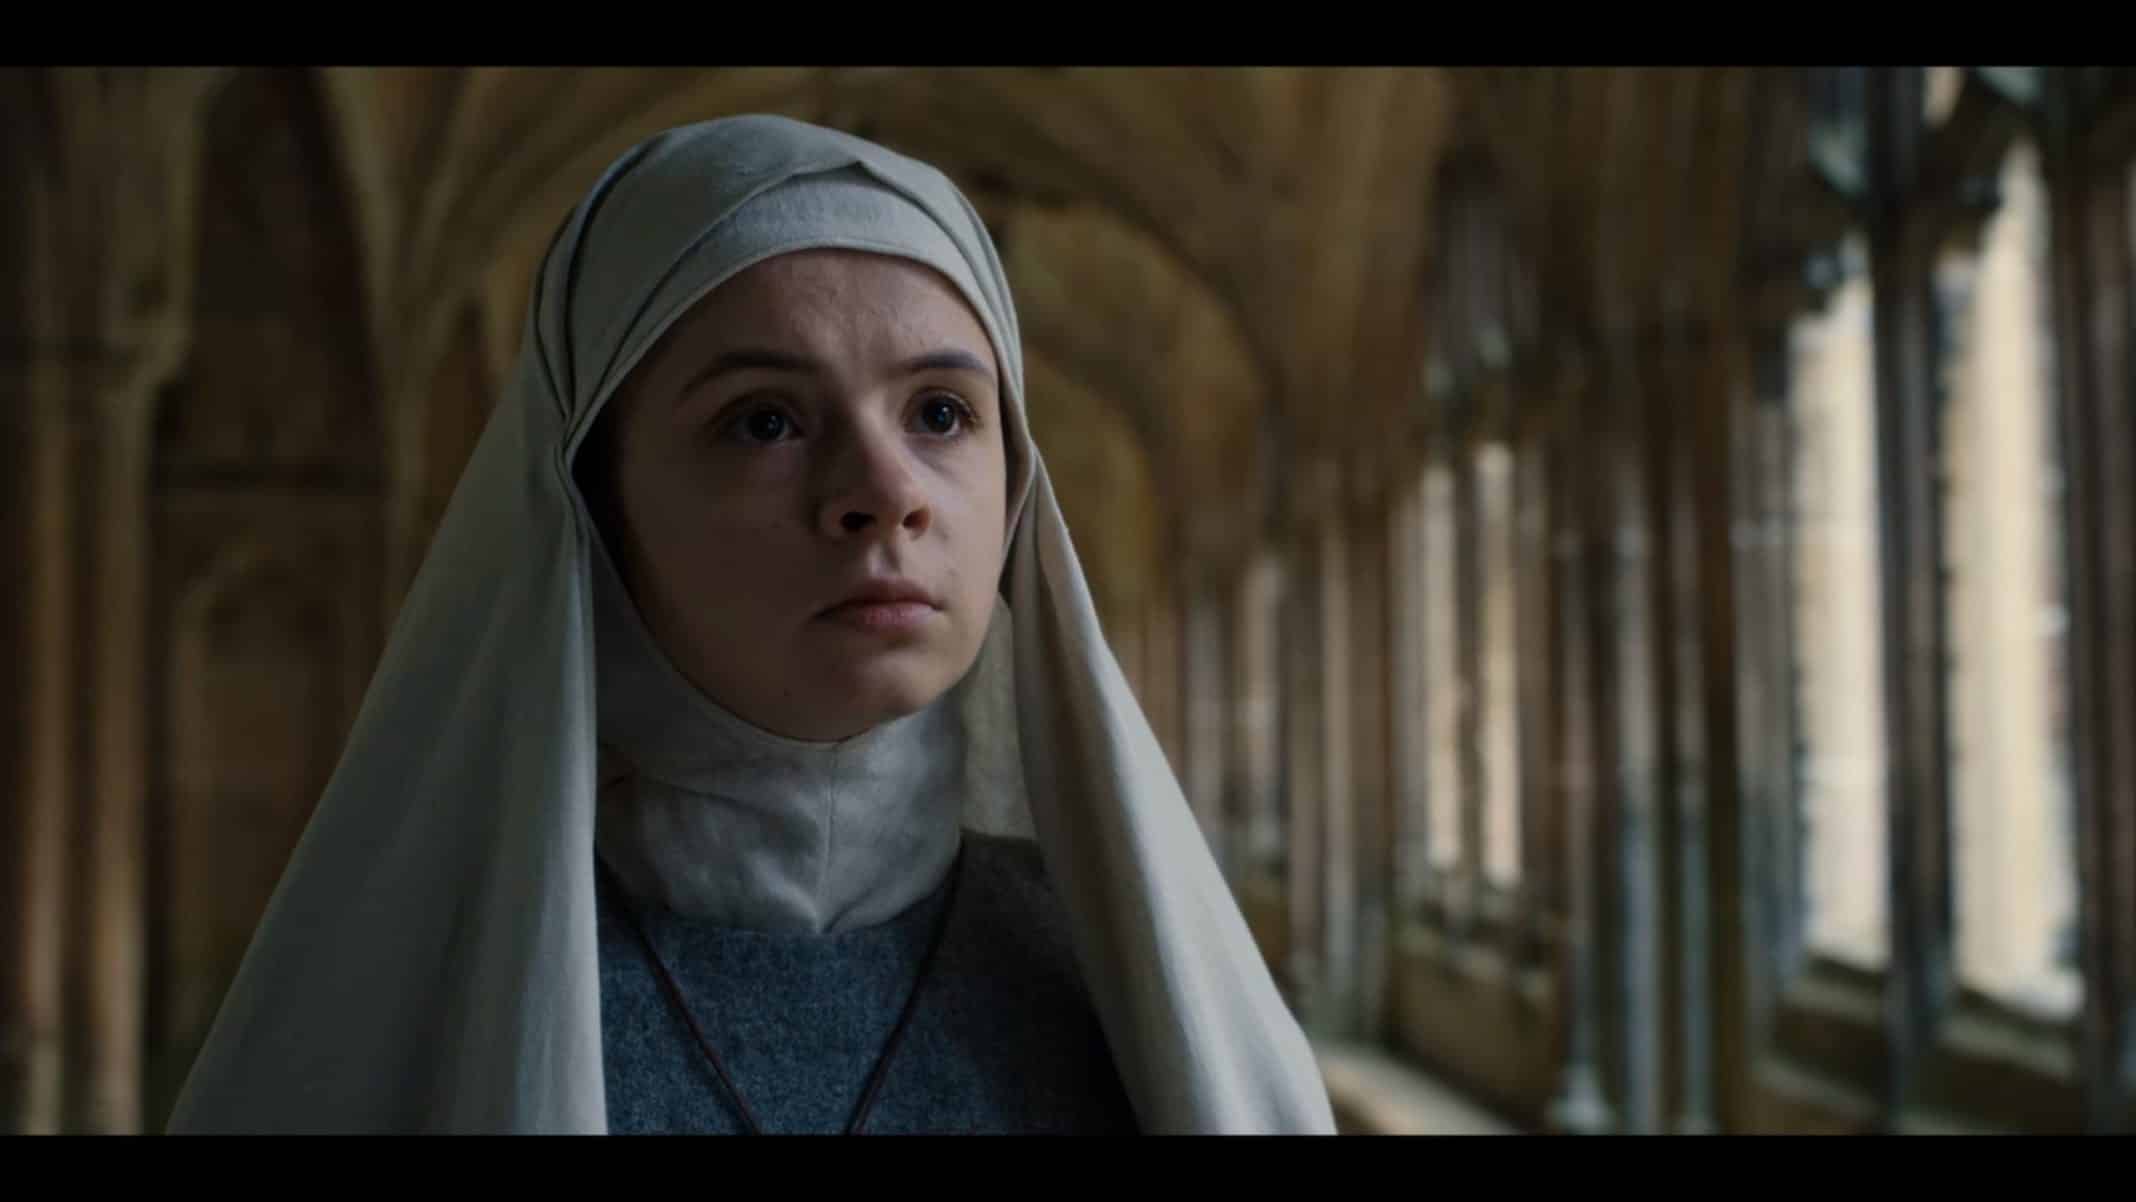 Sister Iris (Emily Coates) as she asks questions of Morgana.